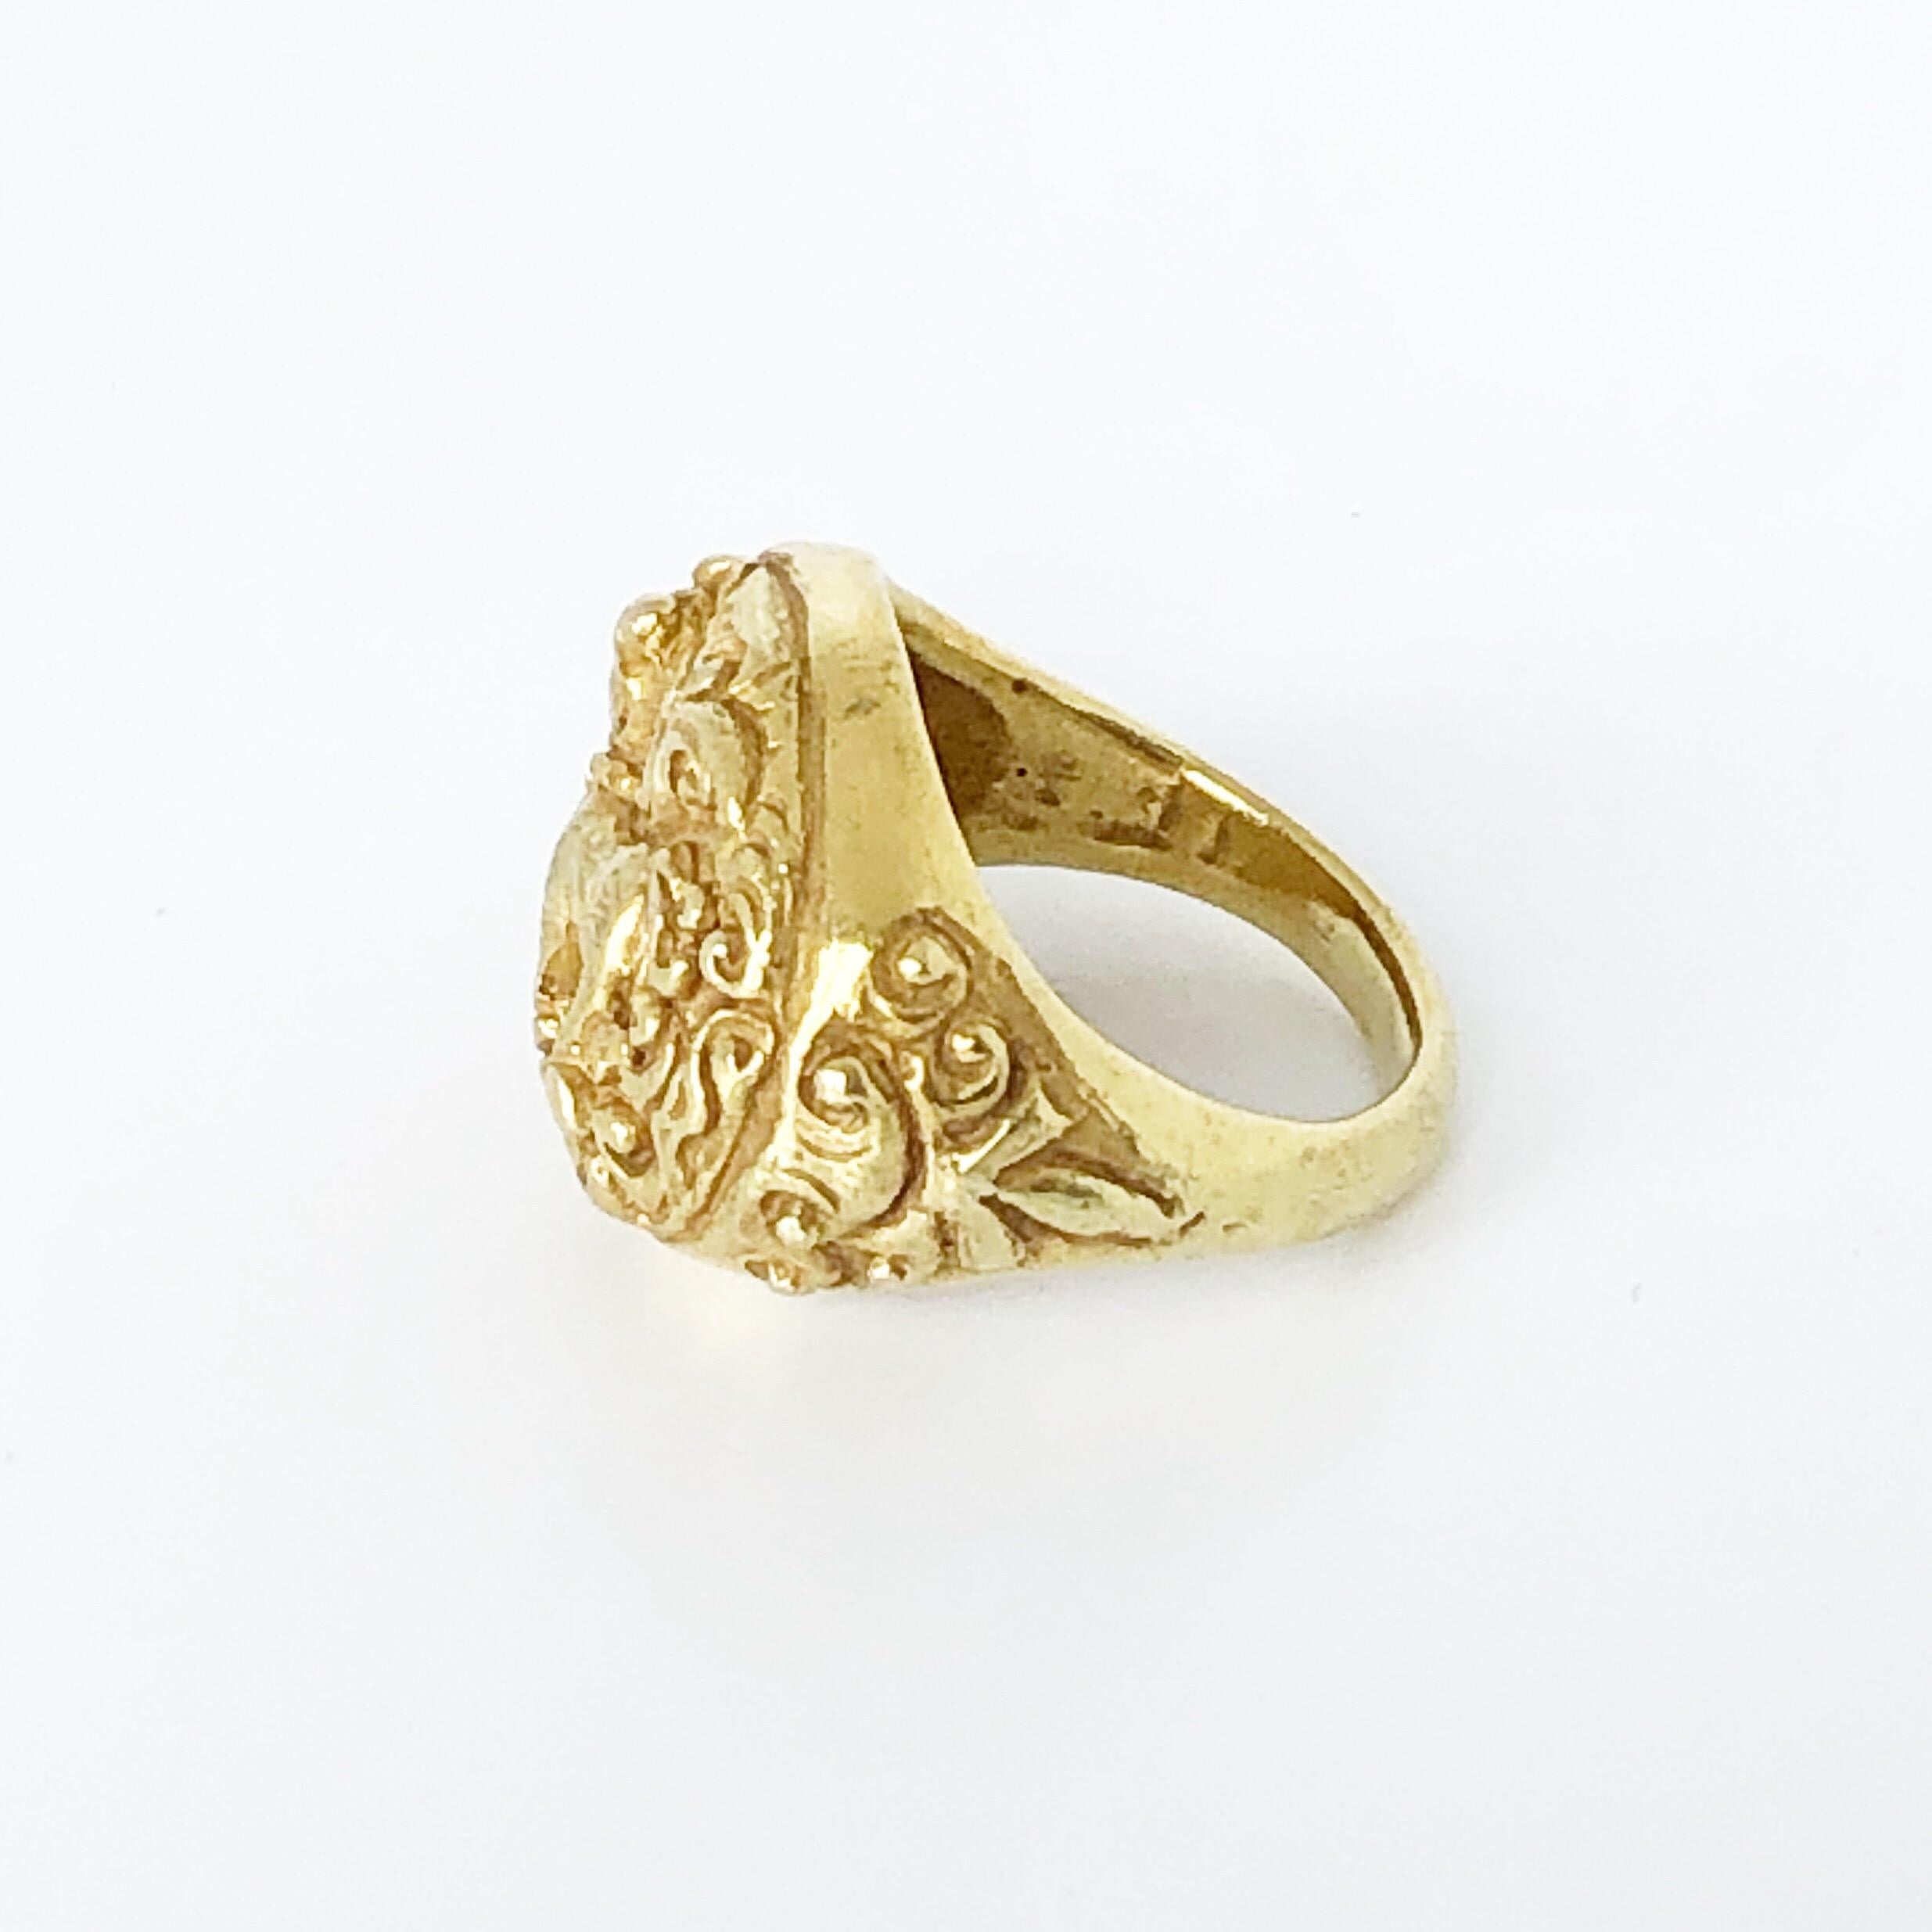 This antique horse ring is a symbol of nobility in East Java in the 14-15th centuries. The Ashvamedha is a horse ritual followed by the Srauta tradition of Vedic religion. It was used by ancient Indian kings to prove their imperial sovereignty: a